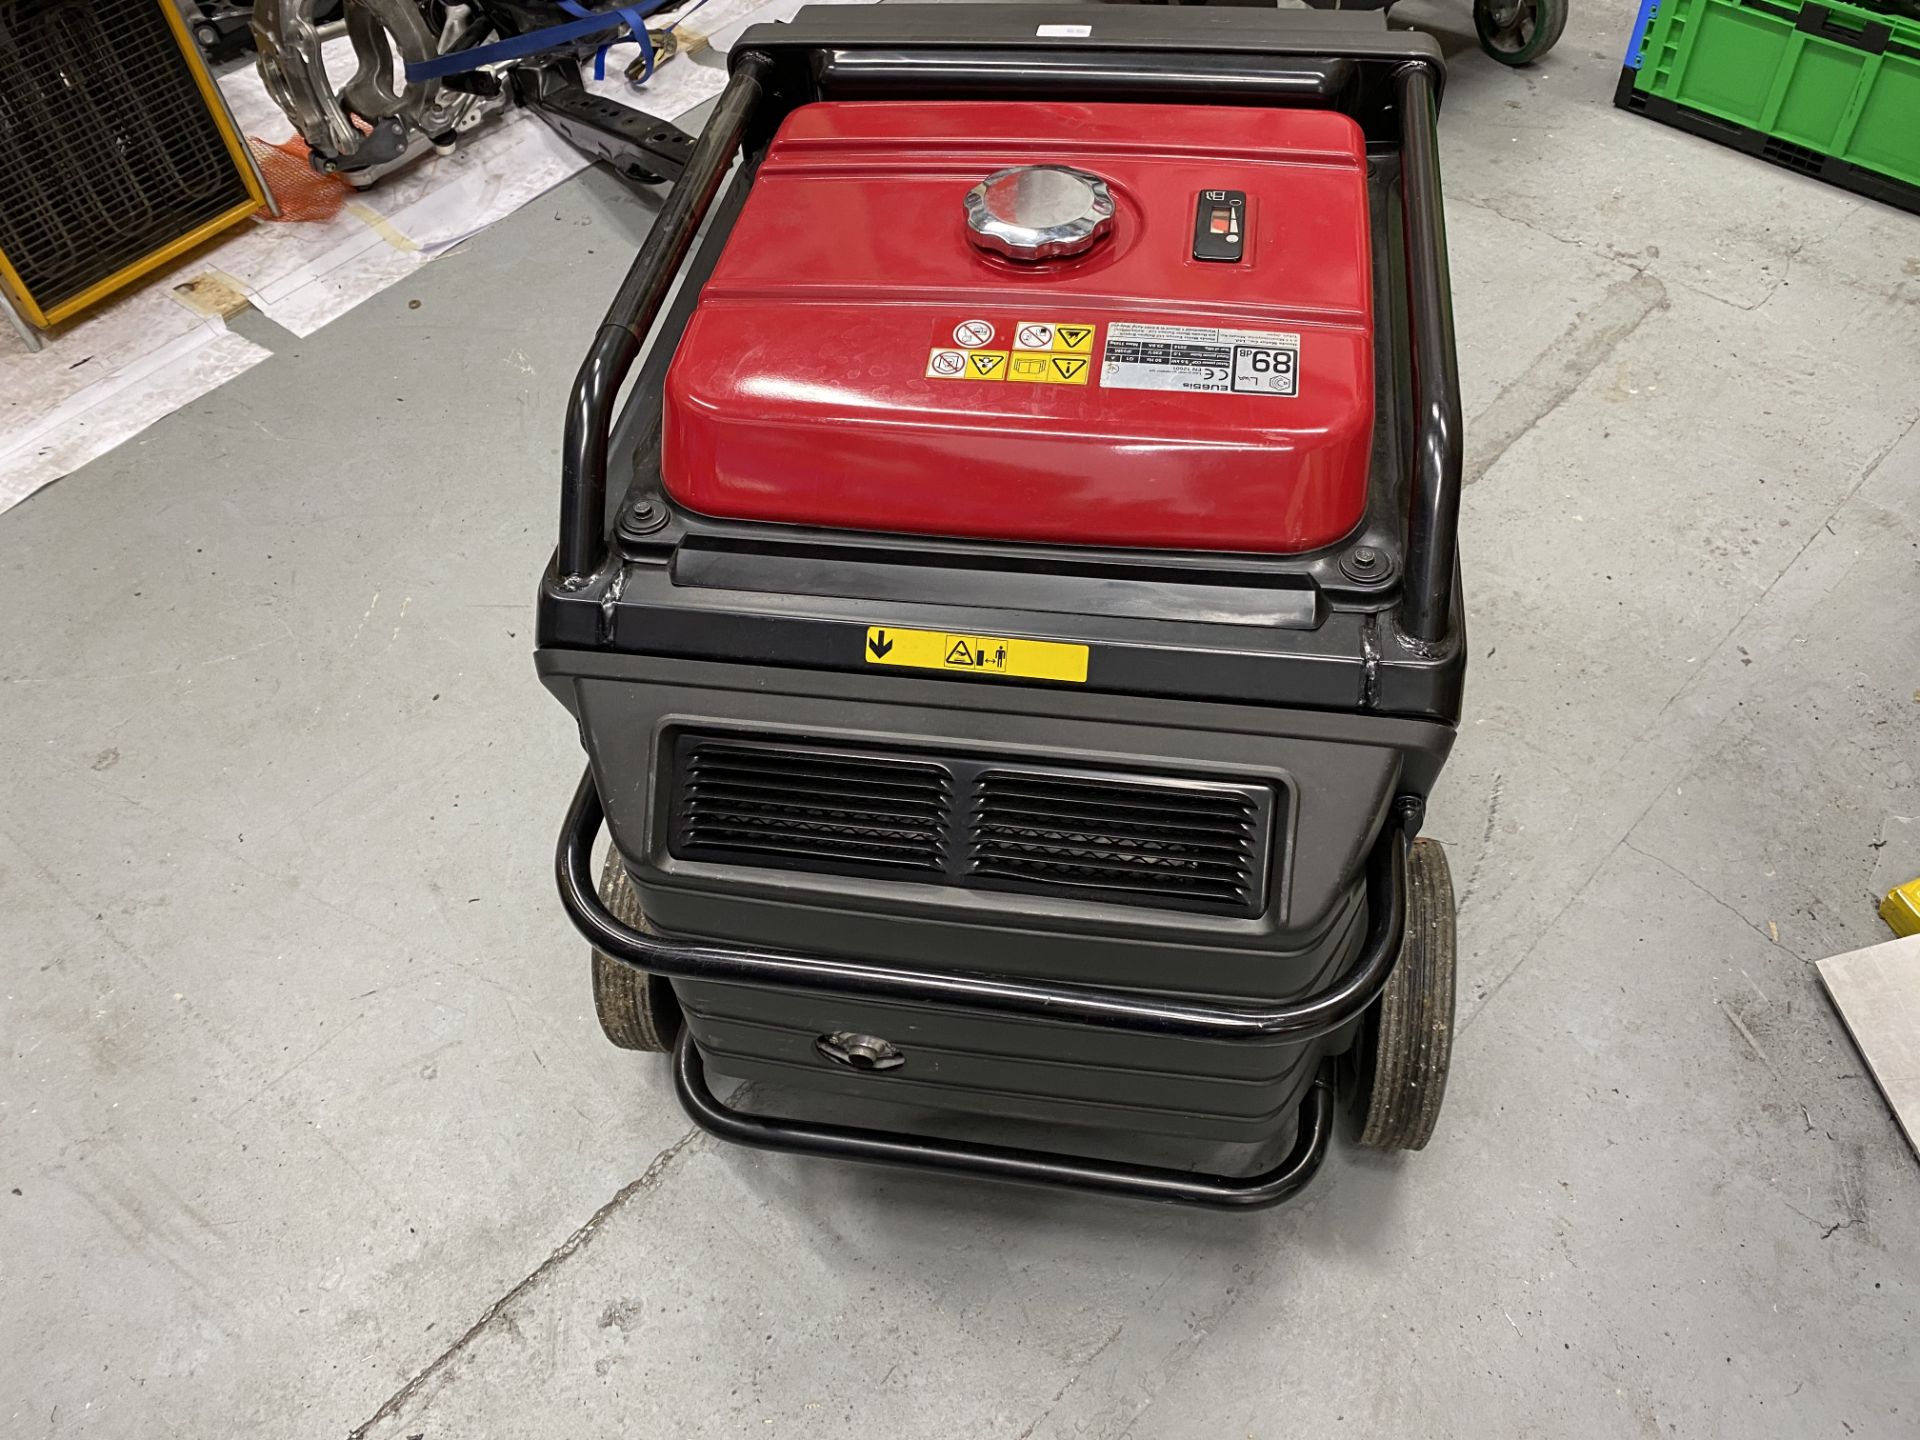 Honda EU65iS inverter mobile petrol generator, rated power 5.5kw, 230 volts, 23.9A, (2014). - Image 3 of 5